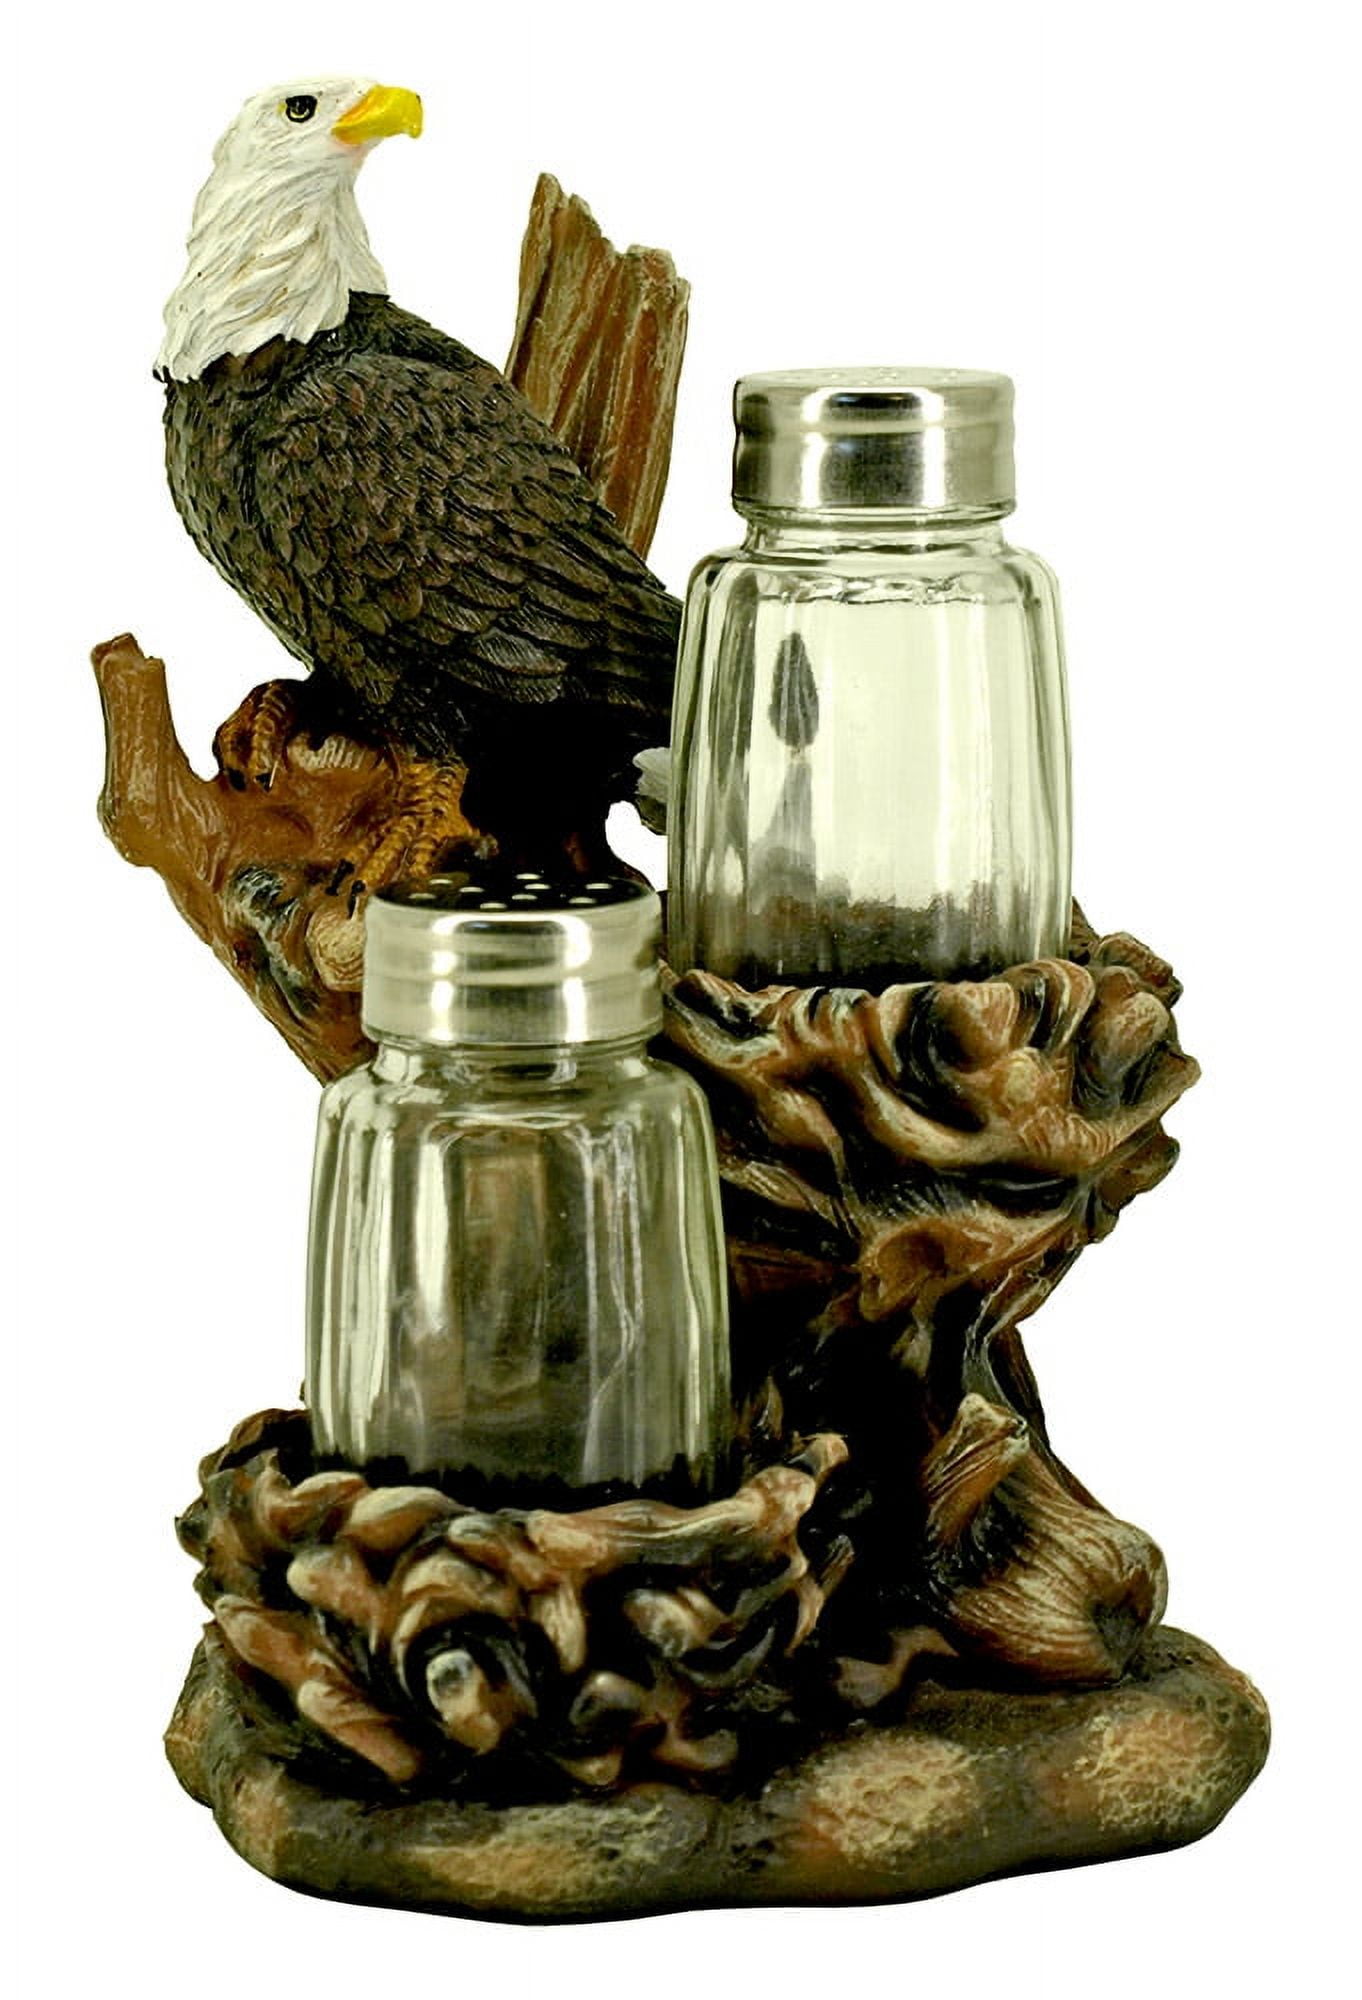 Federal Salt & Pepper Mills and Shakers - Liberty Tabletop - Made in America